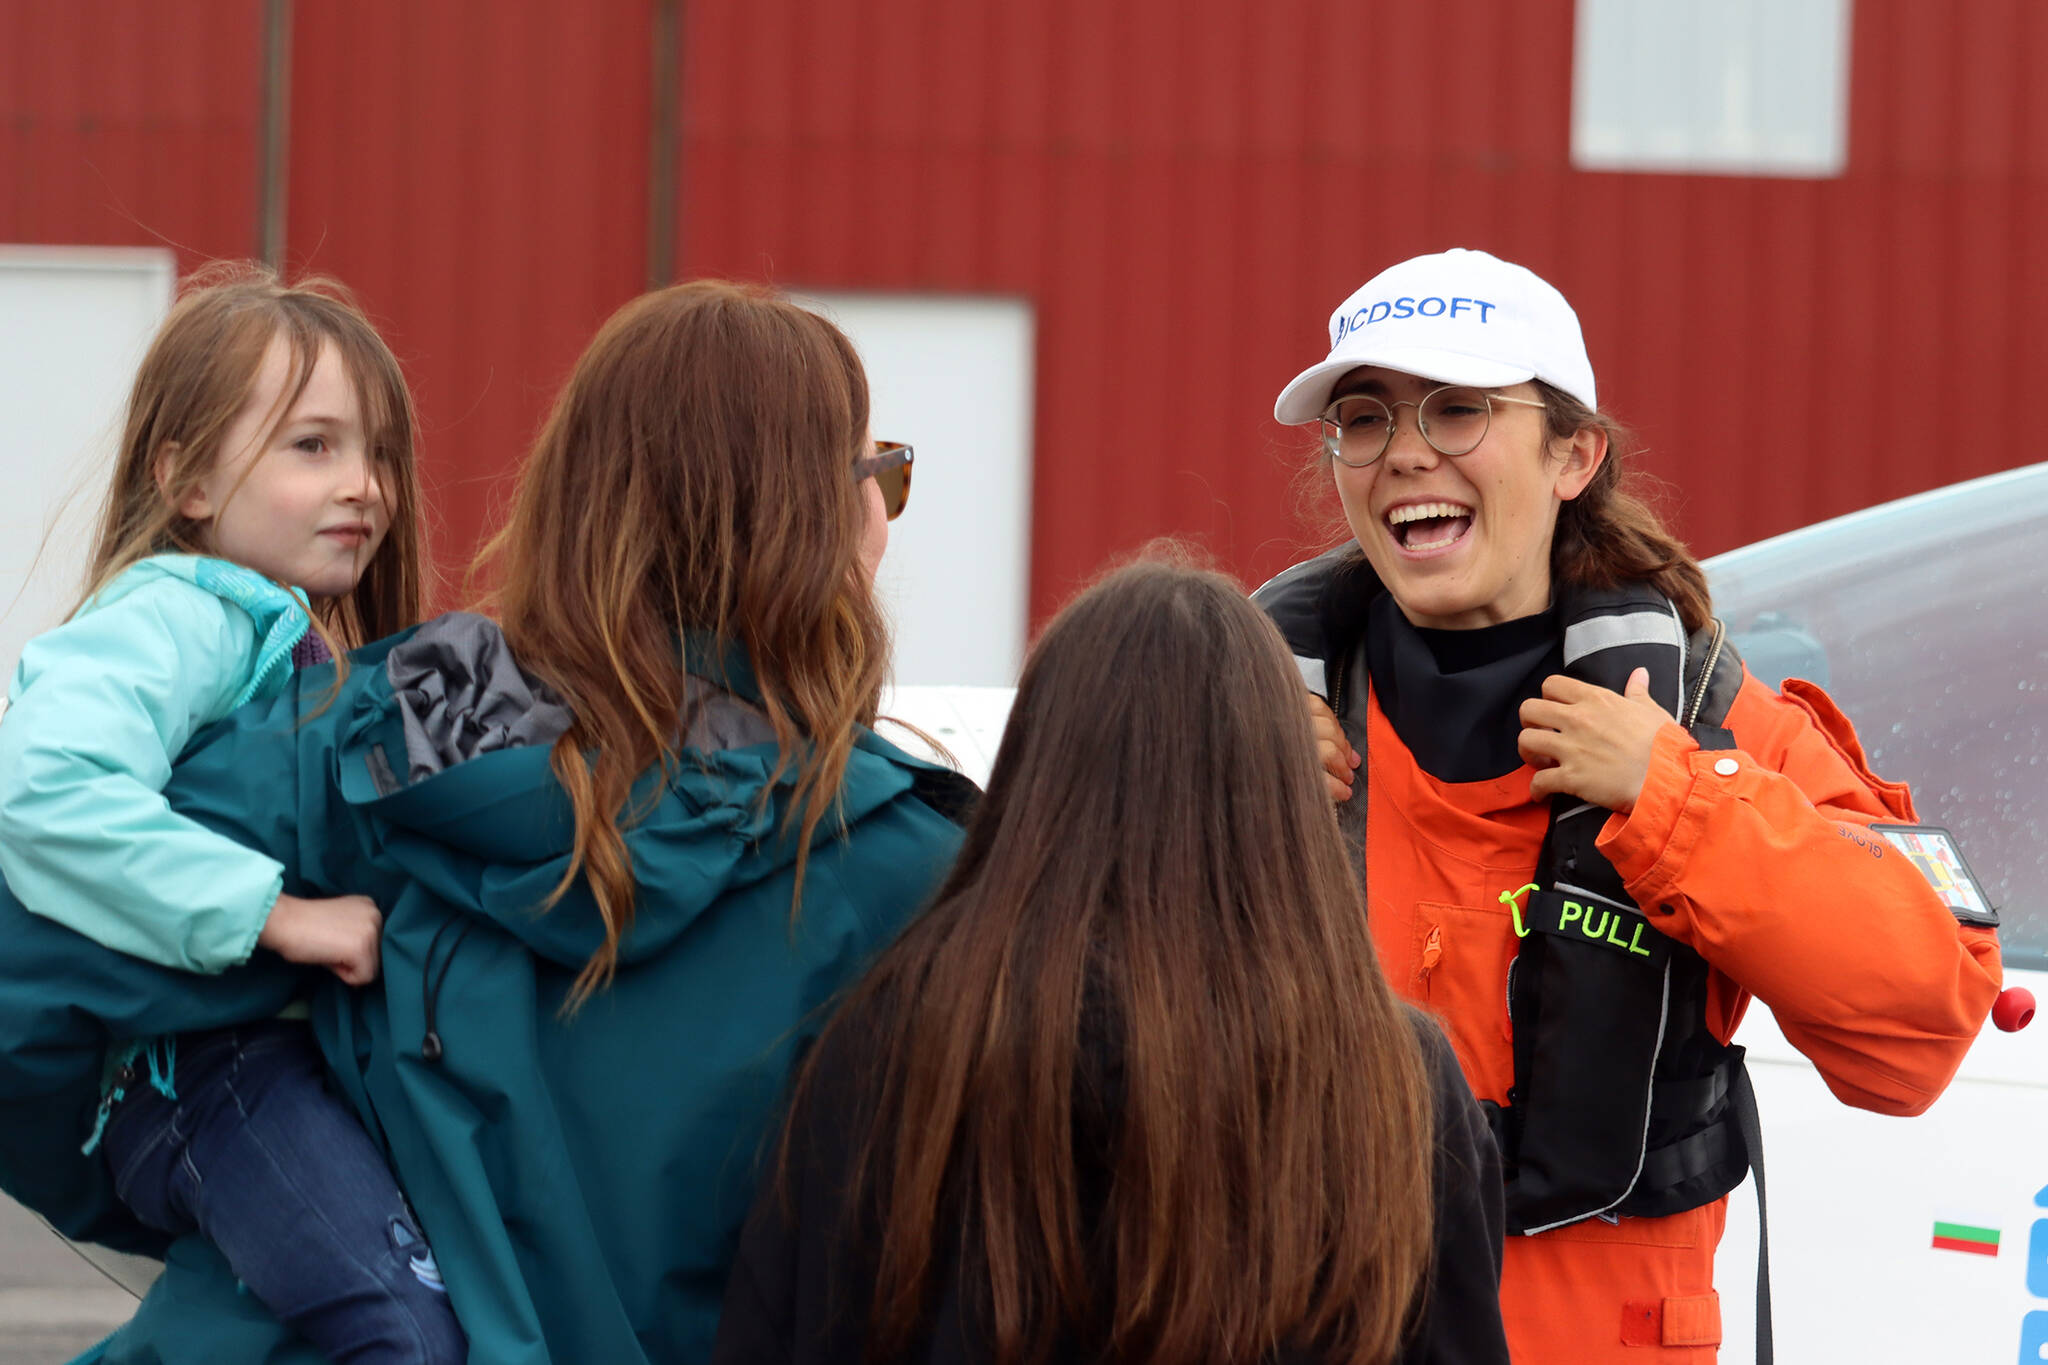 Adelynn, Heather and Aubrie Engen talk with Zara Rutherford at Ward Air on Saturday. Rutherford, who is pursuing a Guinness world record for youngest woman to fly solo around the world, took time to talk to people, take photos and sign autographs after landing in Juneau.(Ben Hohenstatt / Juneau Empire)